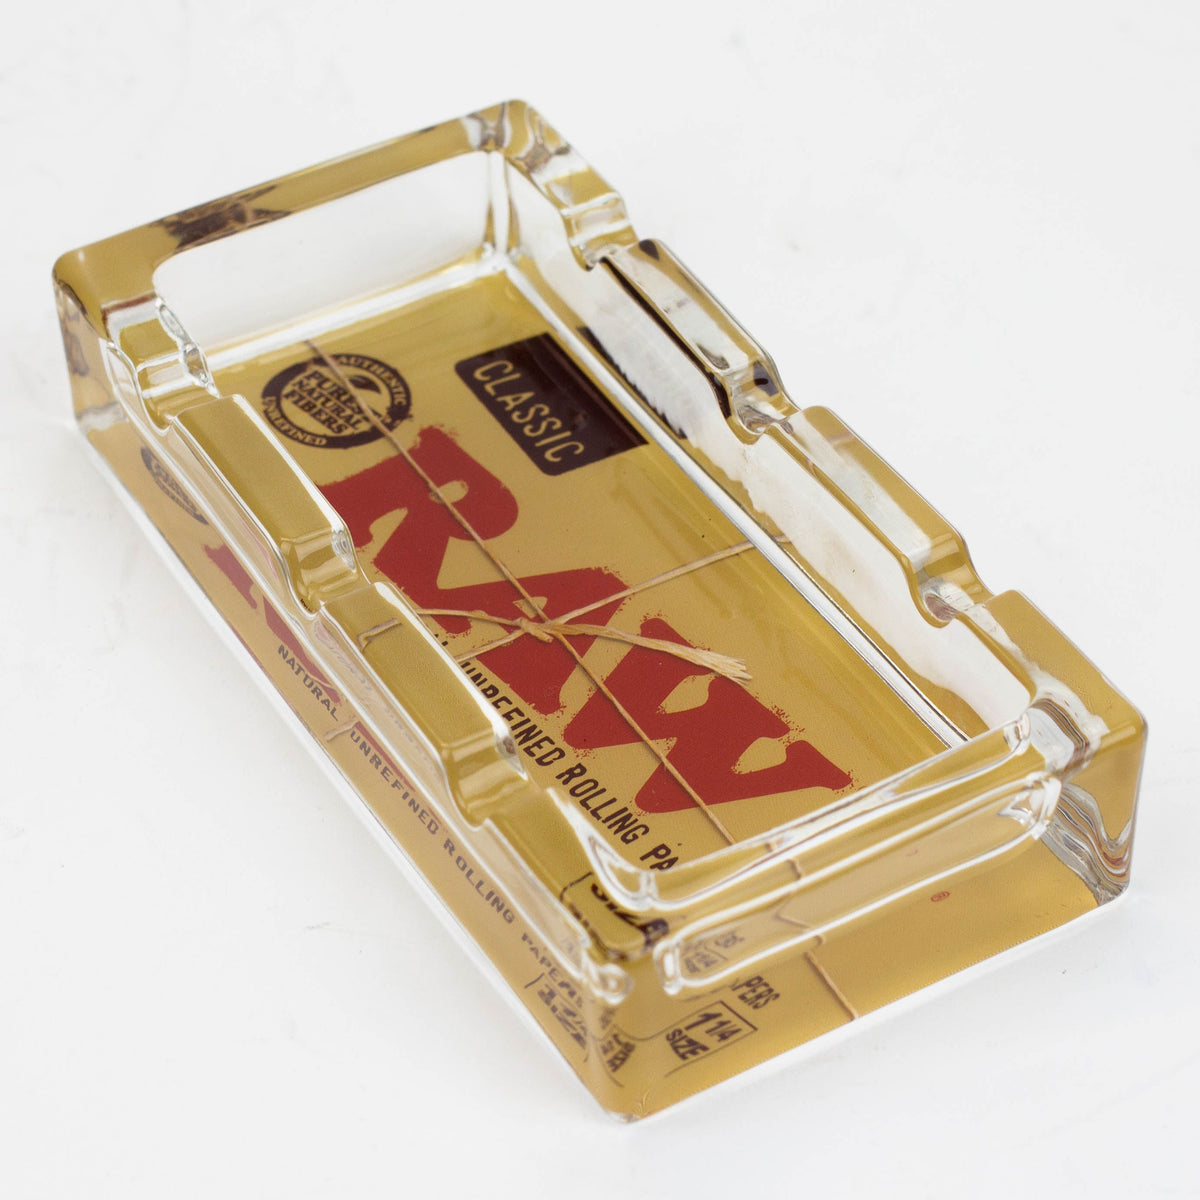 RAW classic authentic Rolling papers glass ash tray 